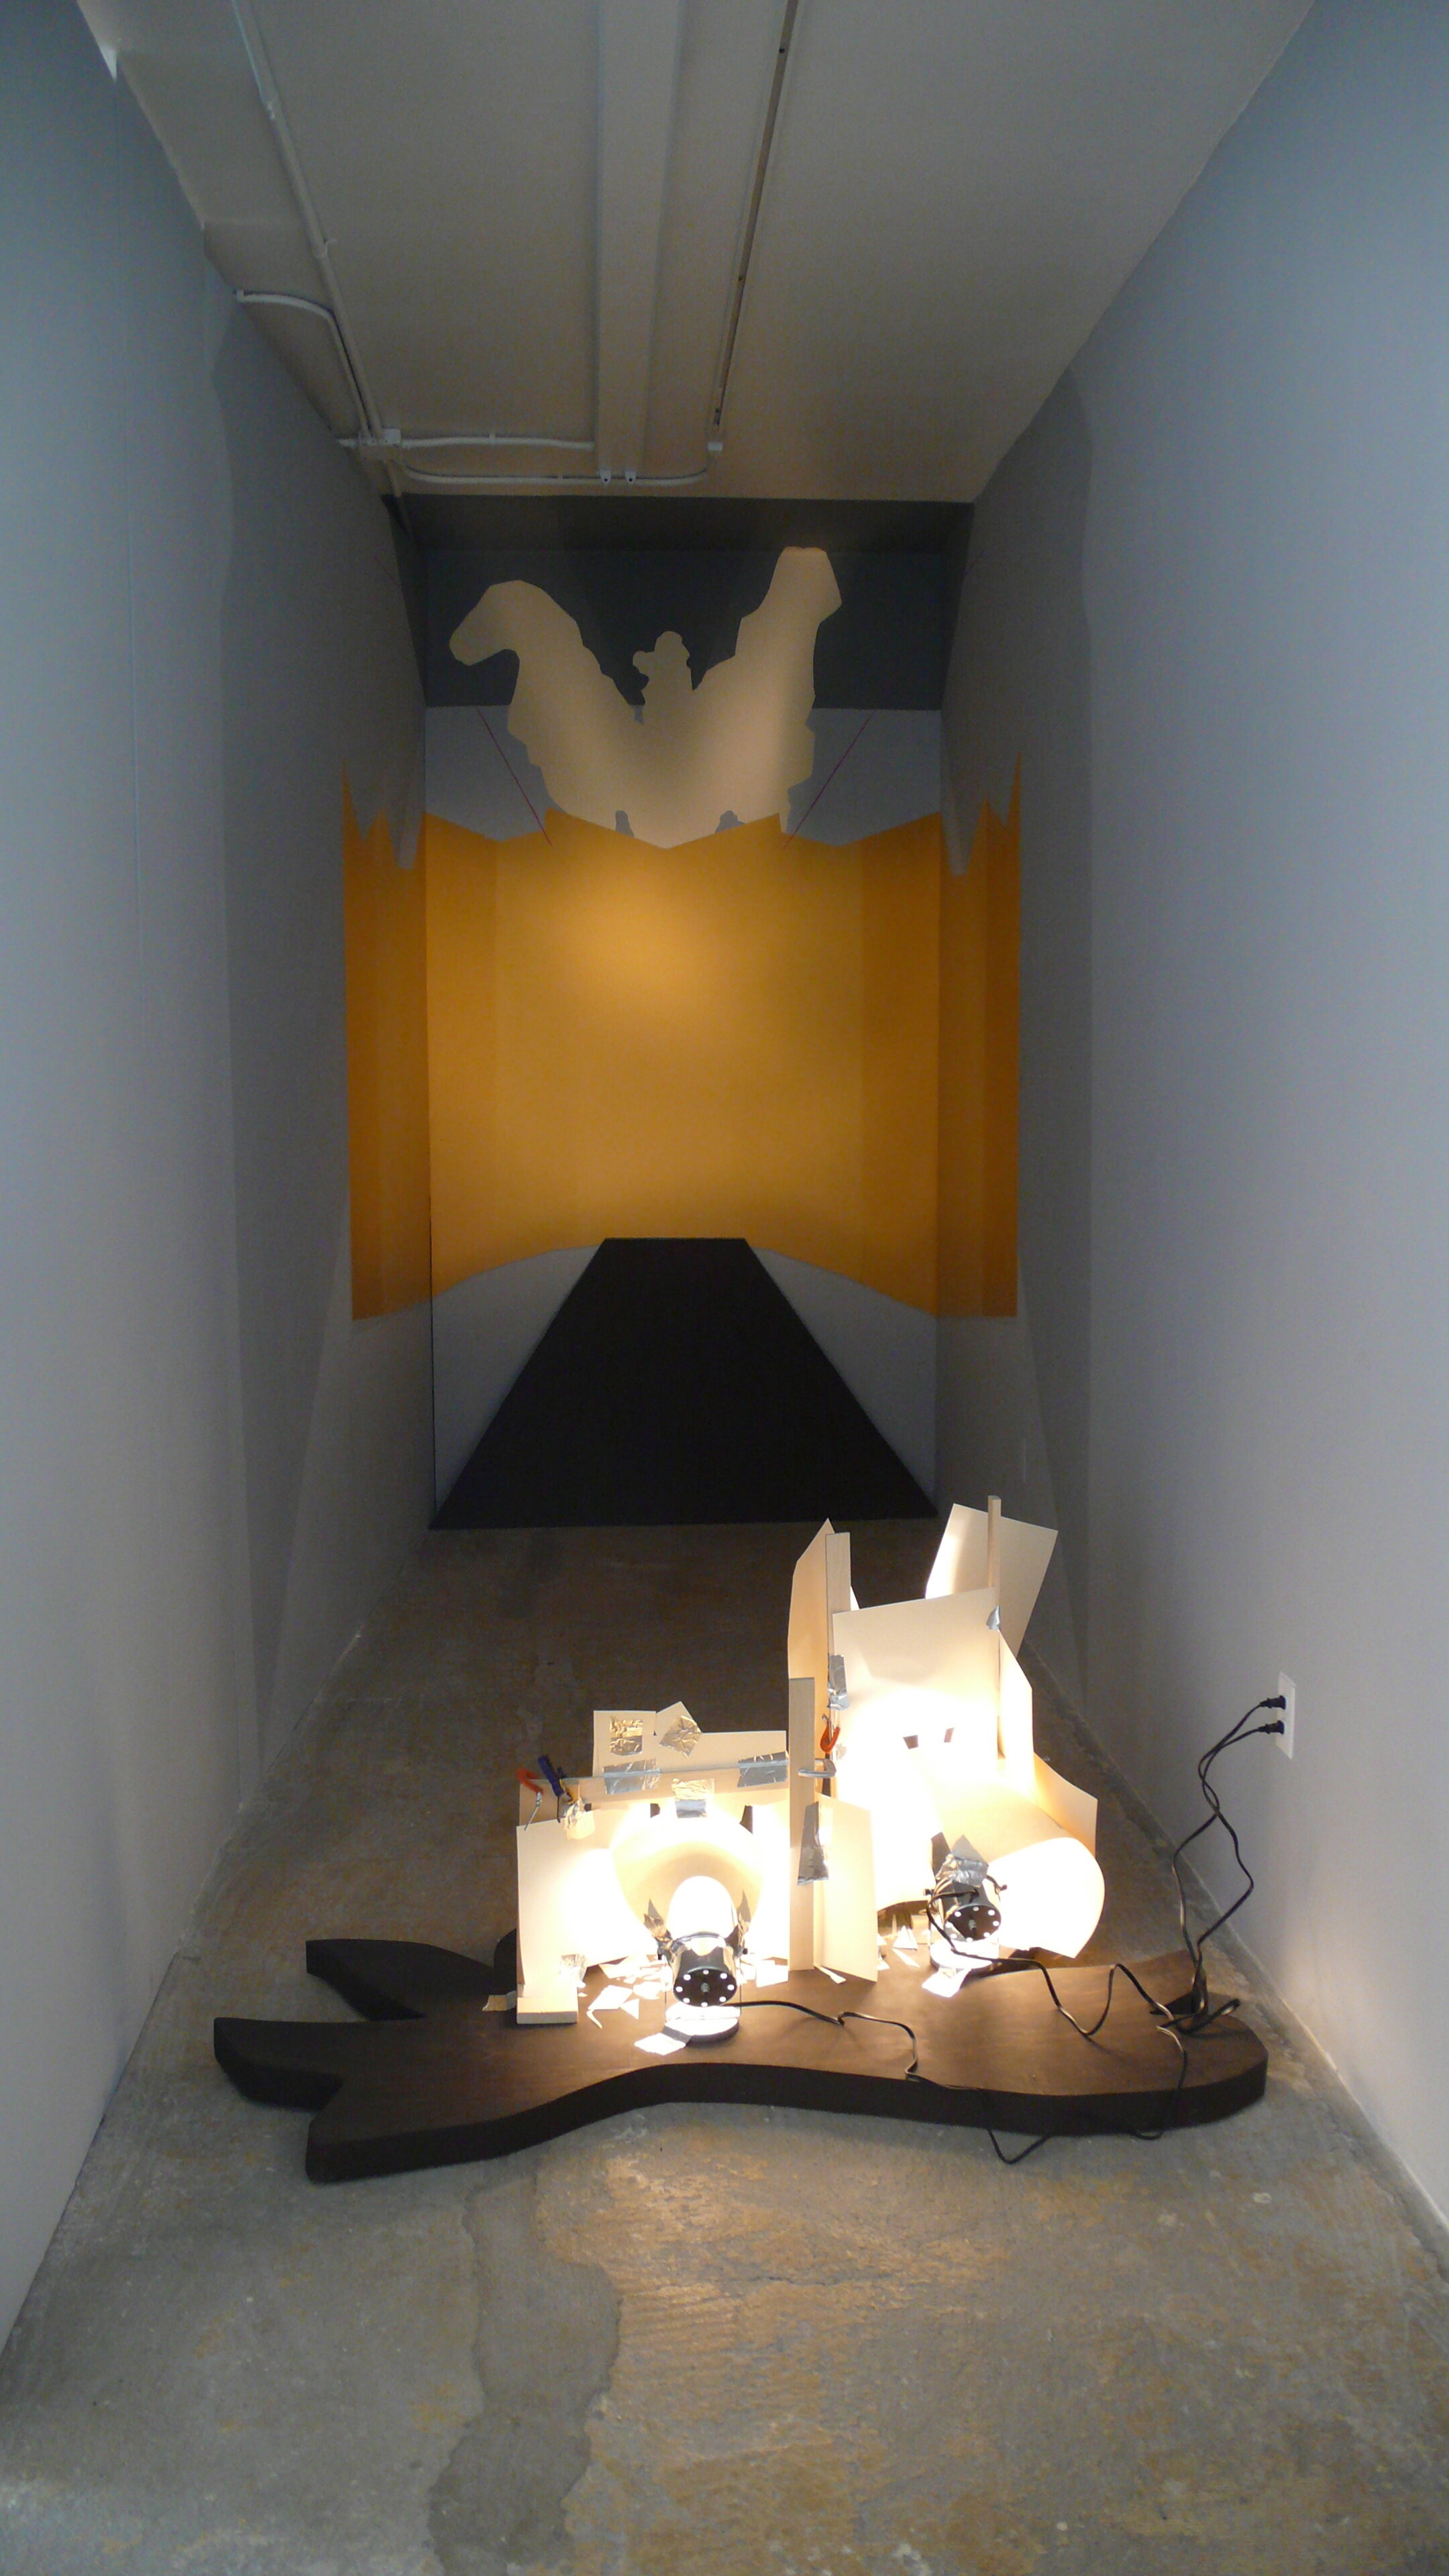 Installation image from the 2011 Adam Hayes exhibition, Of the triumph it hosted, at Cindy Rucker Gallery